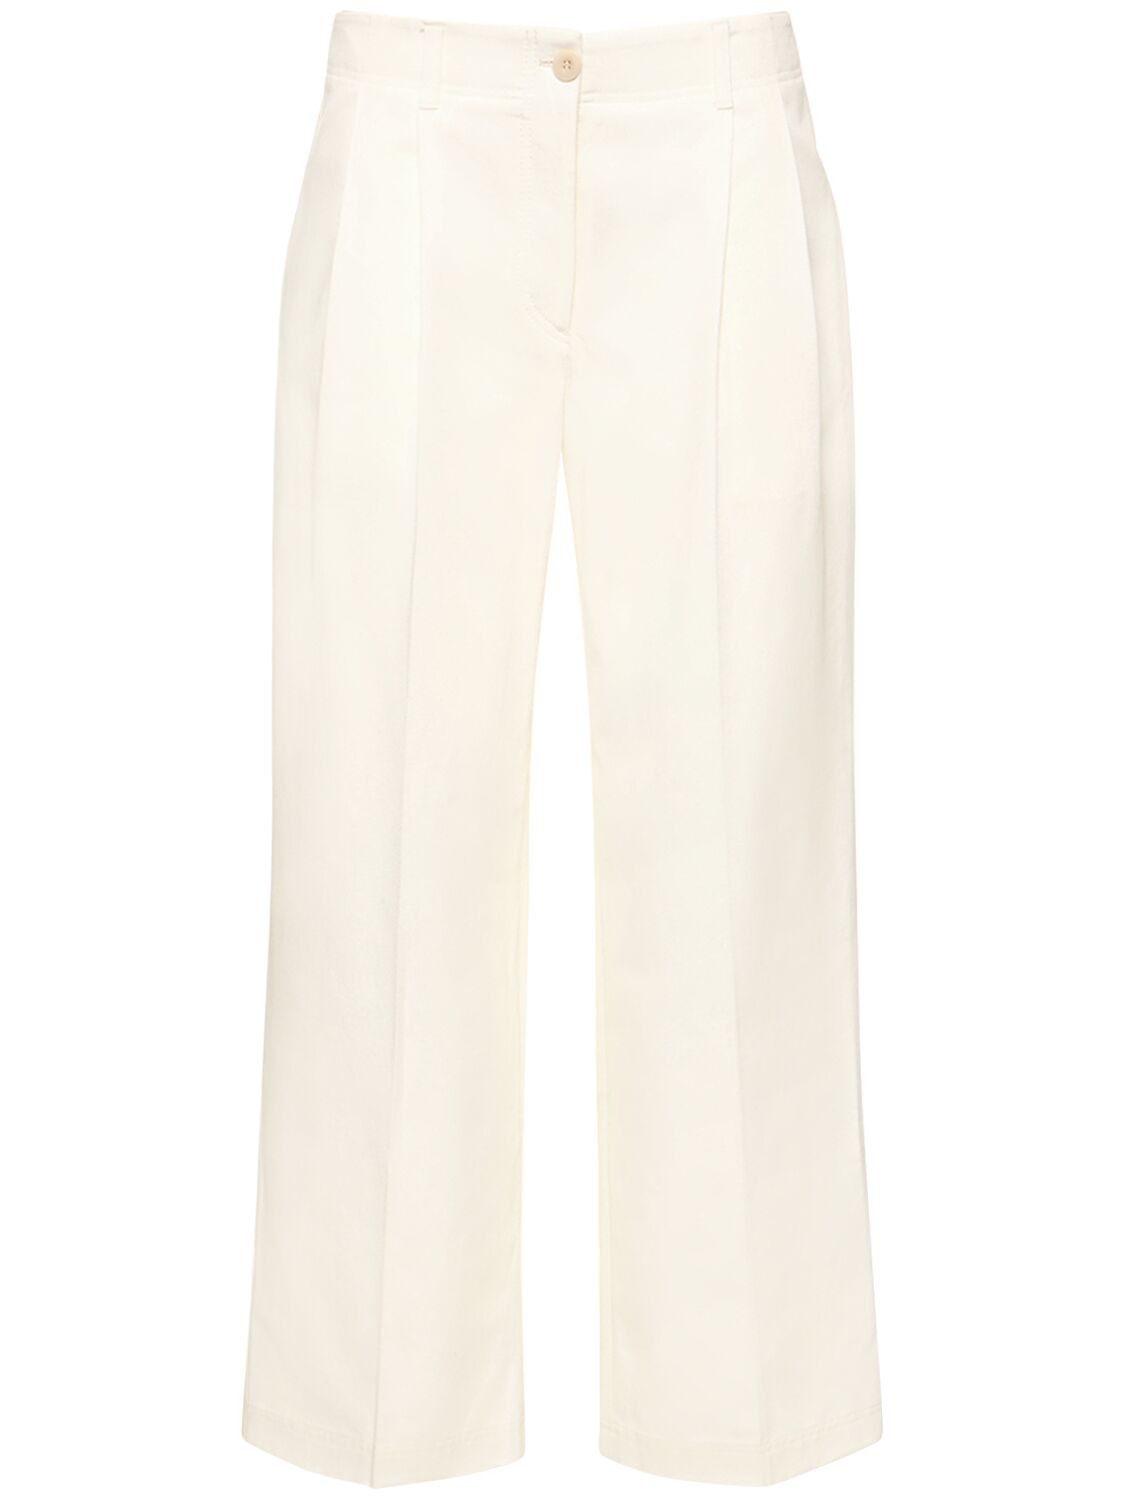 Image of Relaxed Twill Cotton Pants